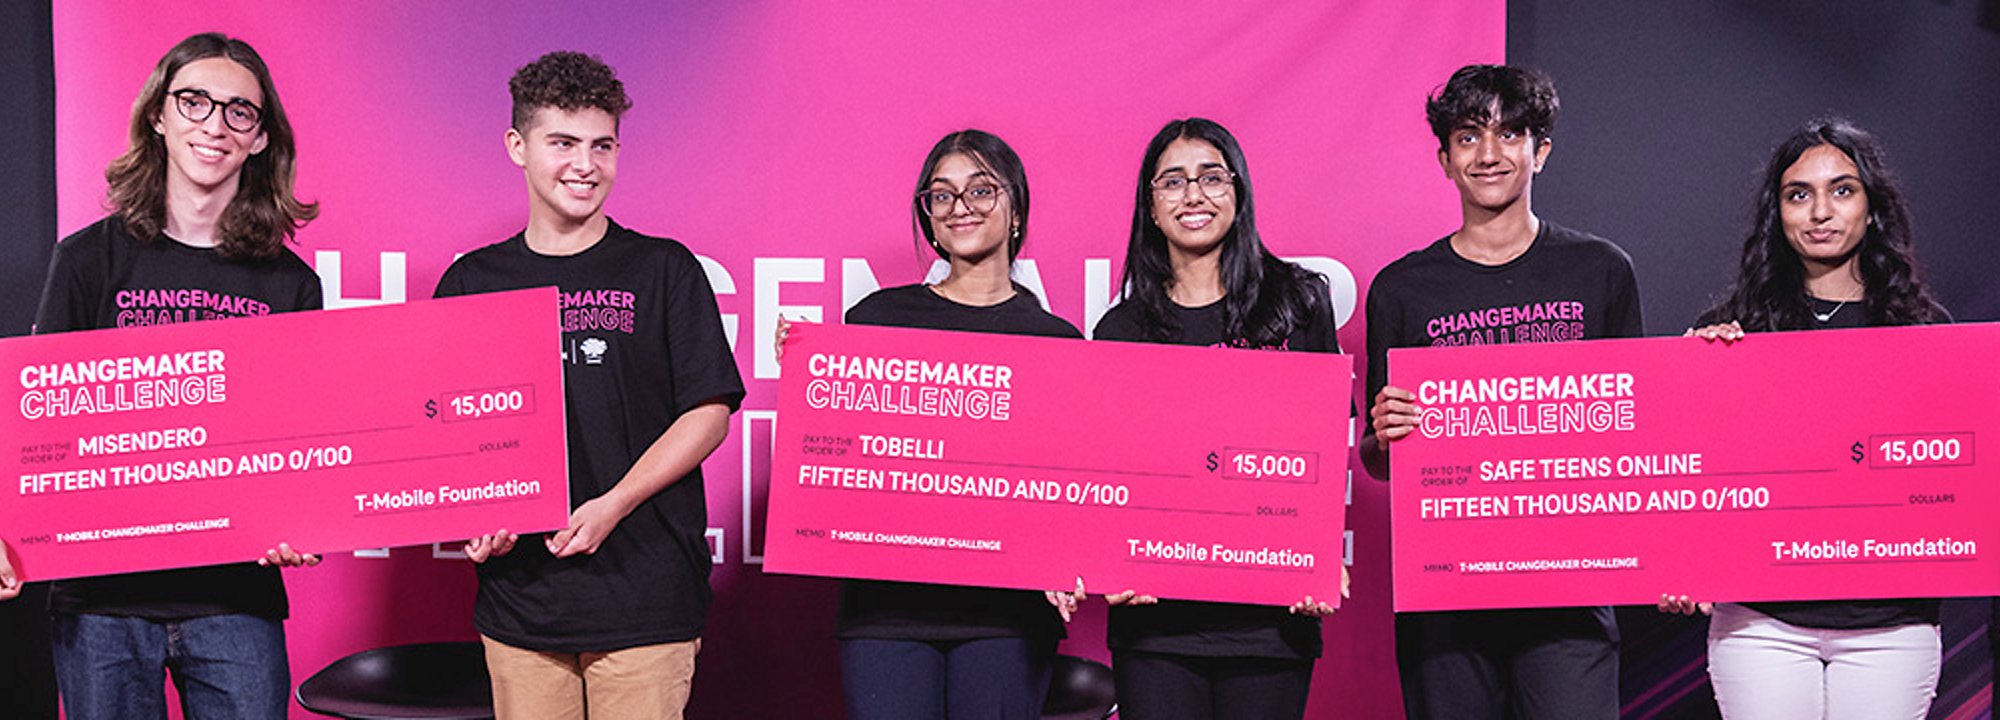 Changemaker students being awarded seed funding for 2022 category winners MiSendero, Tobelli, and Safe Teens Online.